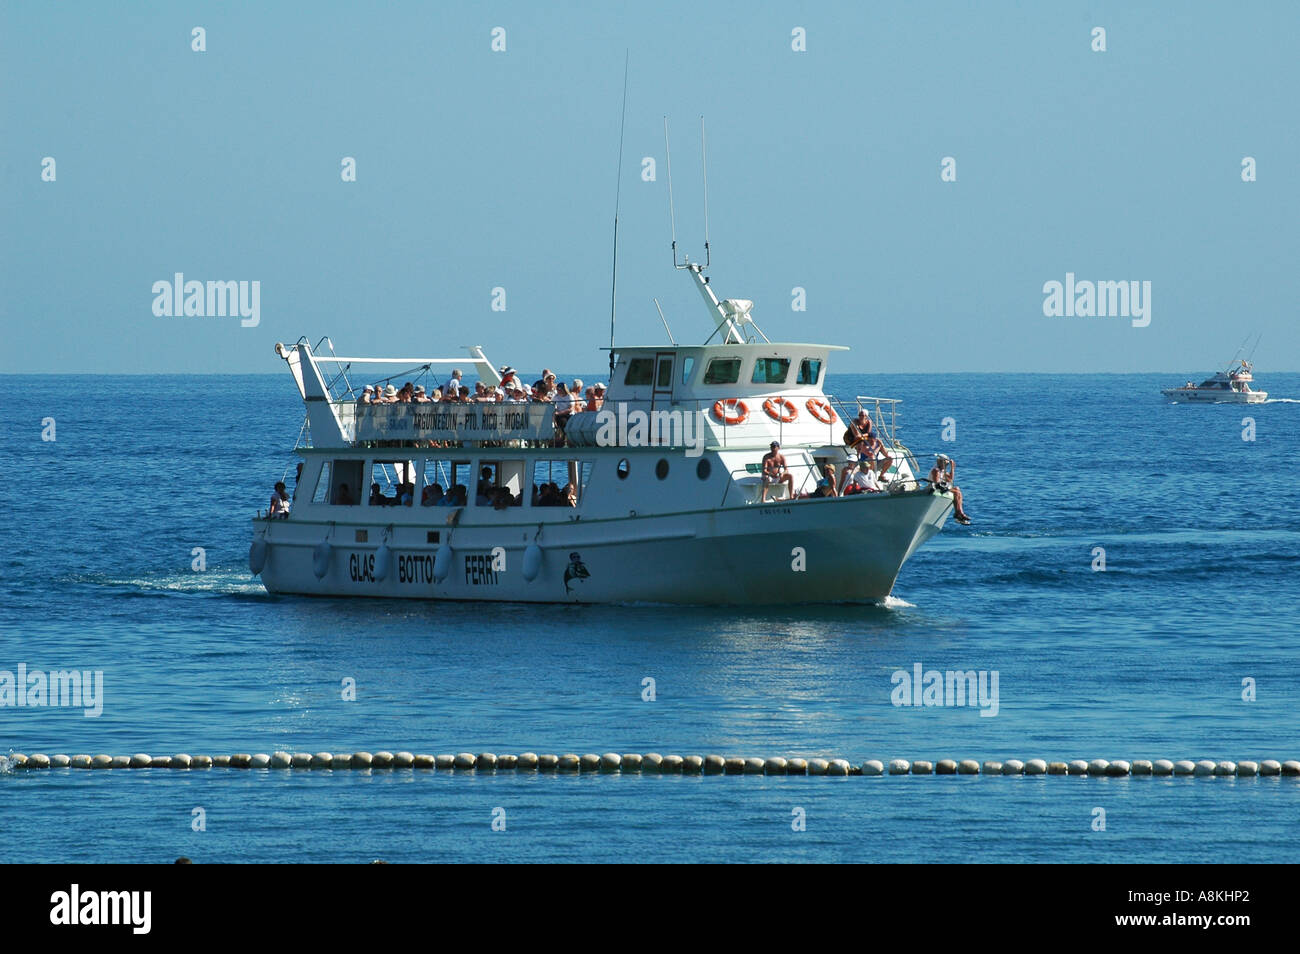 Tourists sail on a ferry from Arguineguin to Puerto Rico and Puerto de Mogan  in Gran Canaria island one of Spain's Canary Islands Stock Photo - Alamy